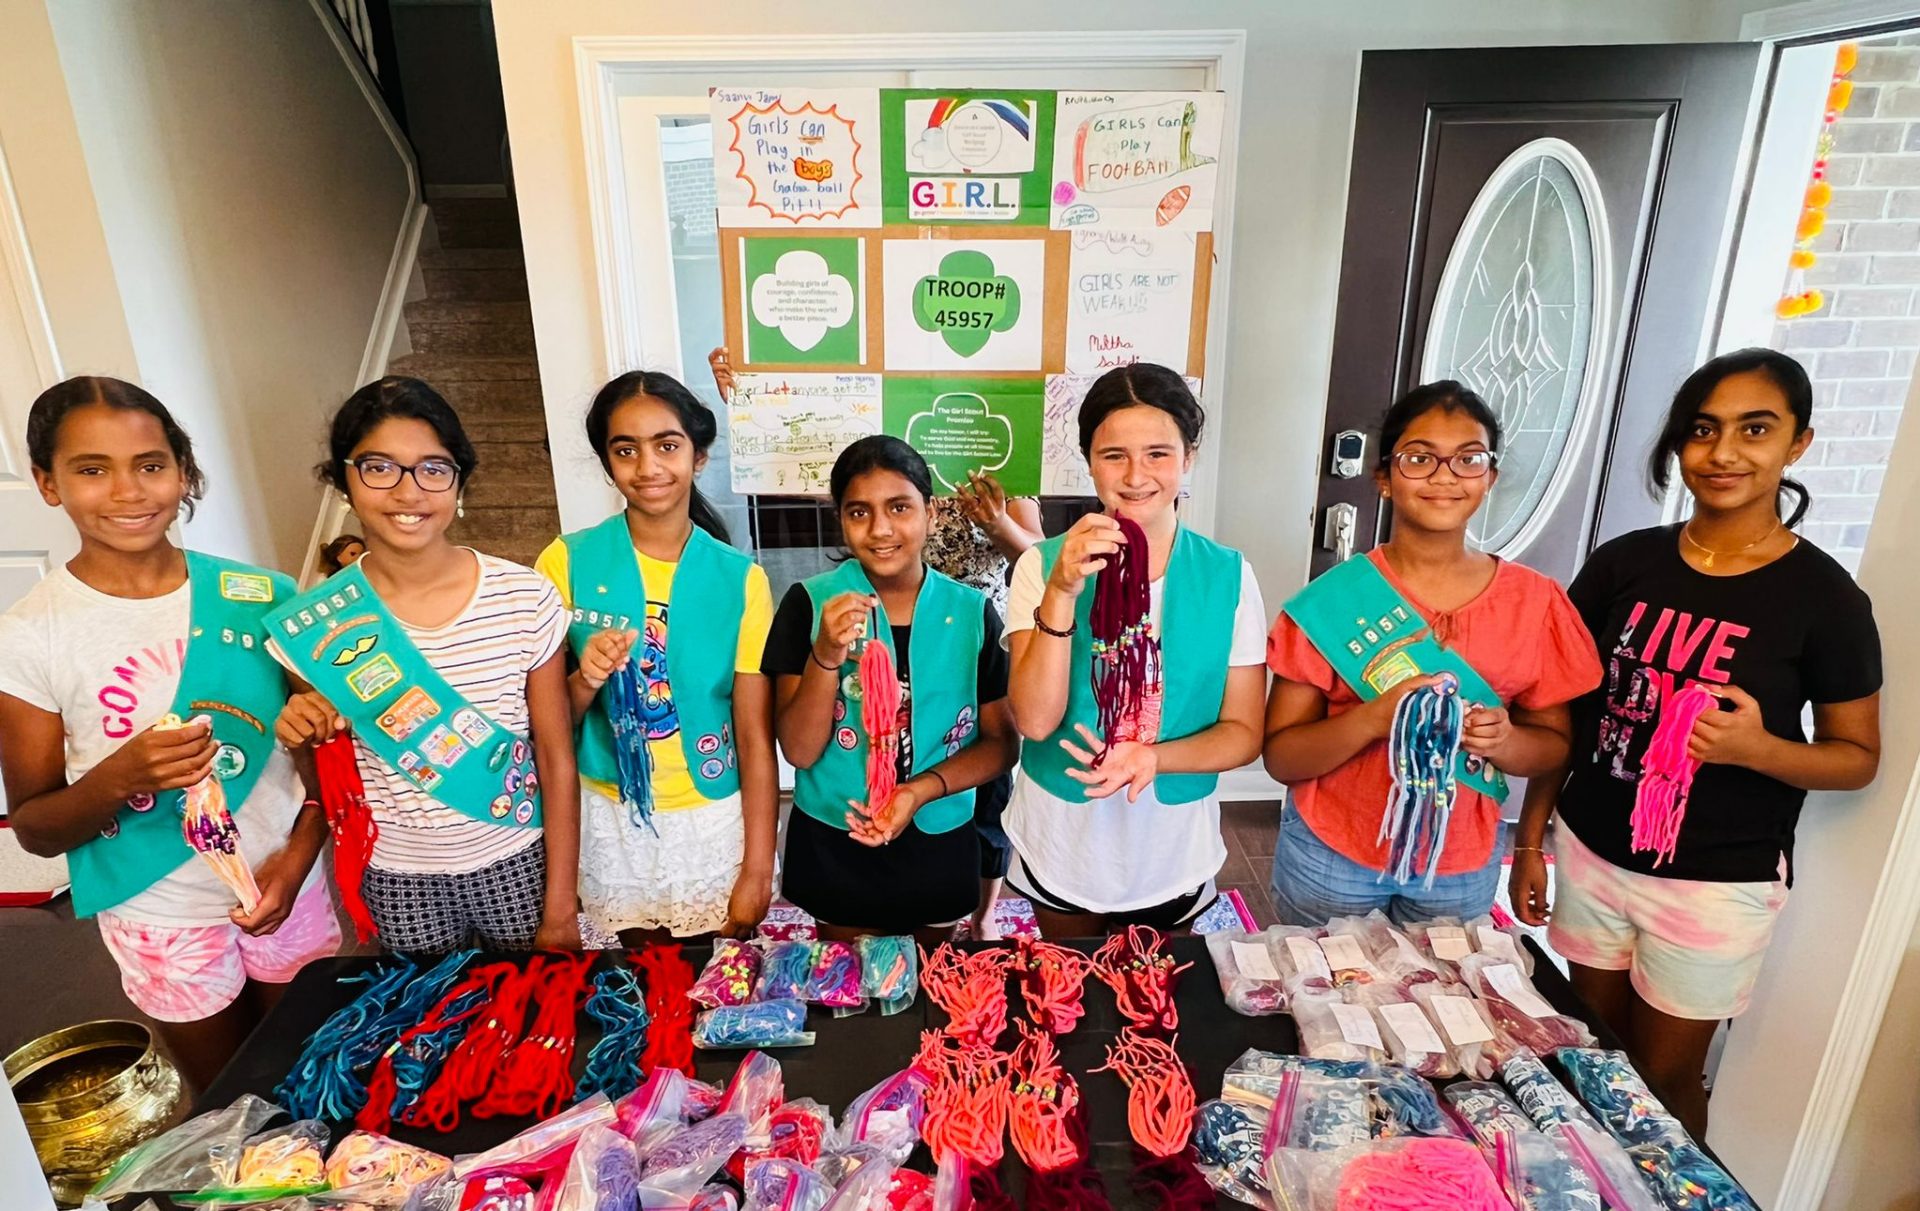  7 Girl Scout Juniors stand in front of the items they crocheted.  